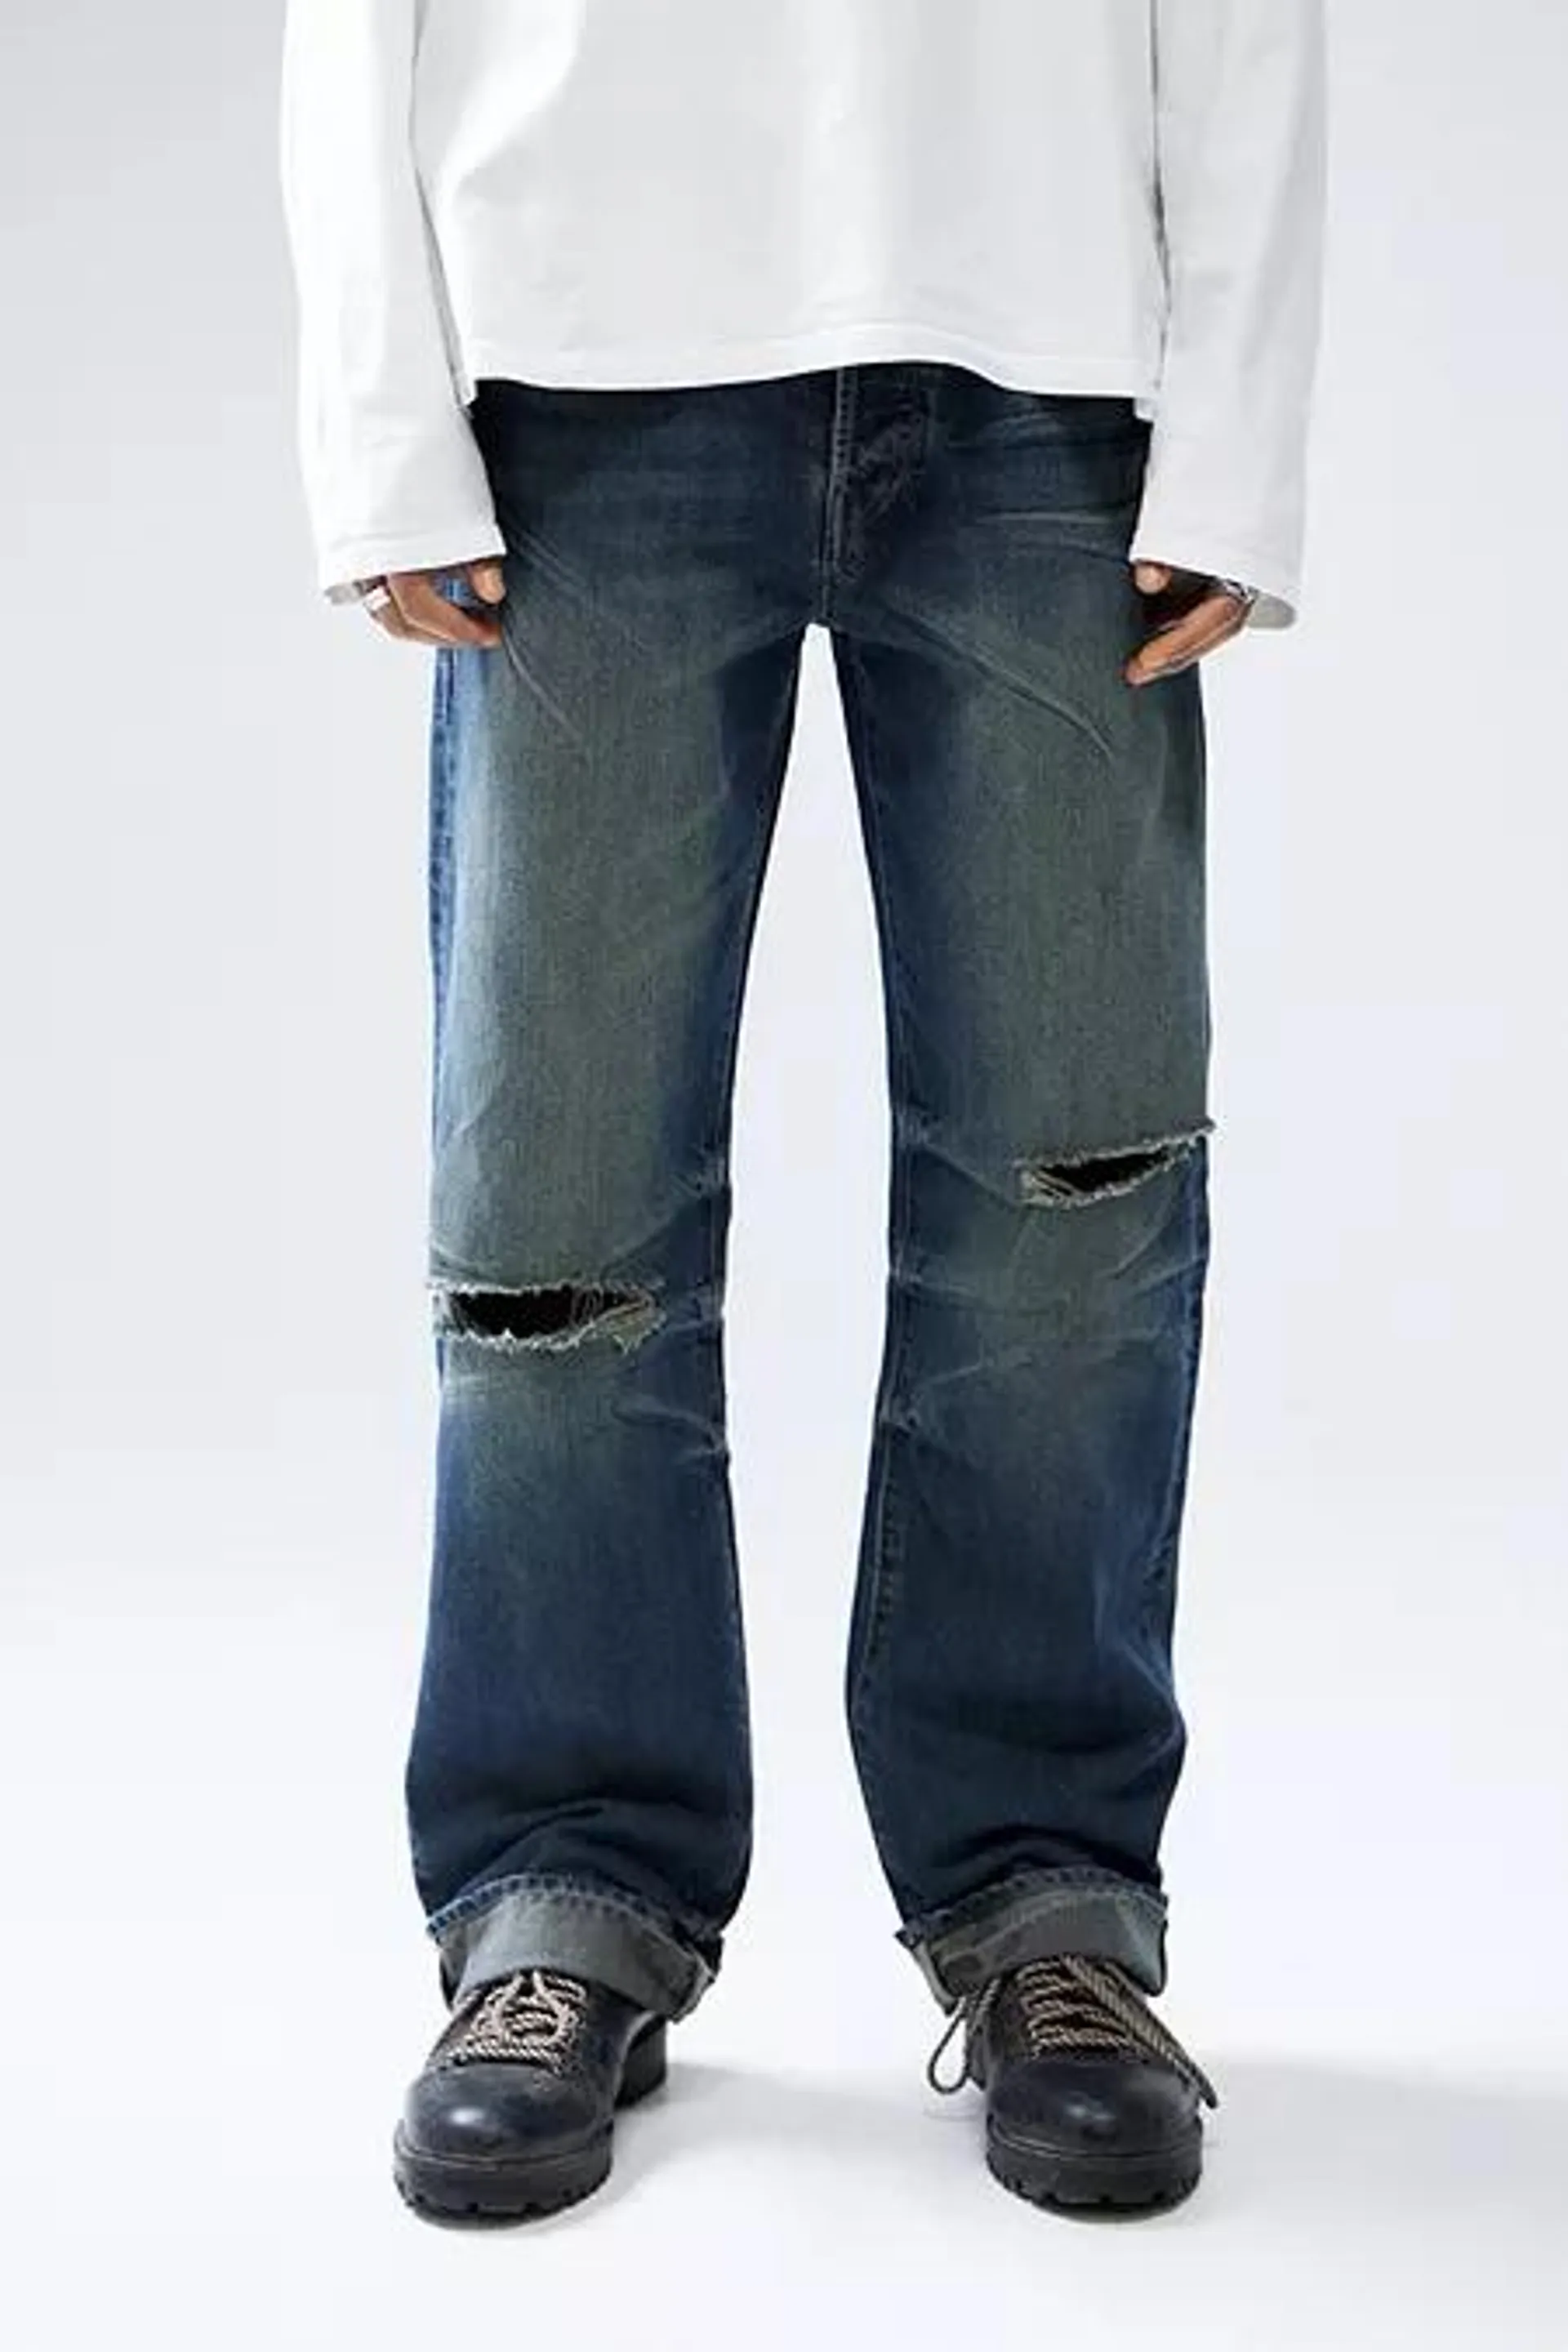 Jaded London Busted Scott Jeans